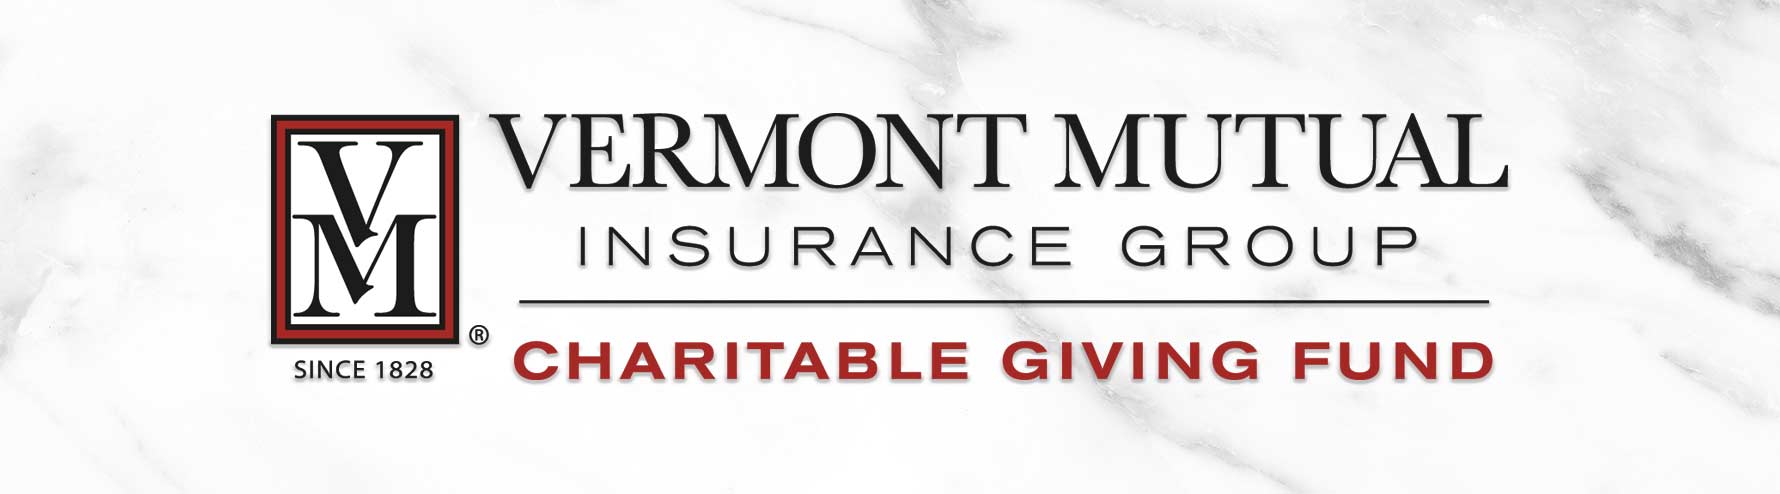 Vermont Mutual Insurance Charitable Giving Fund